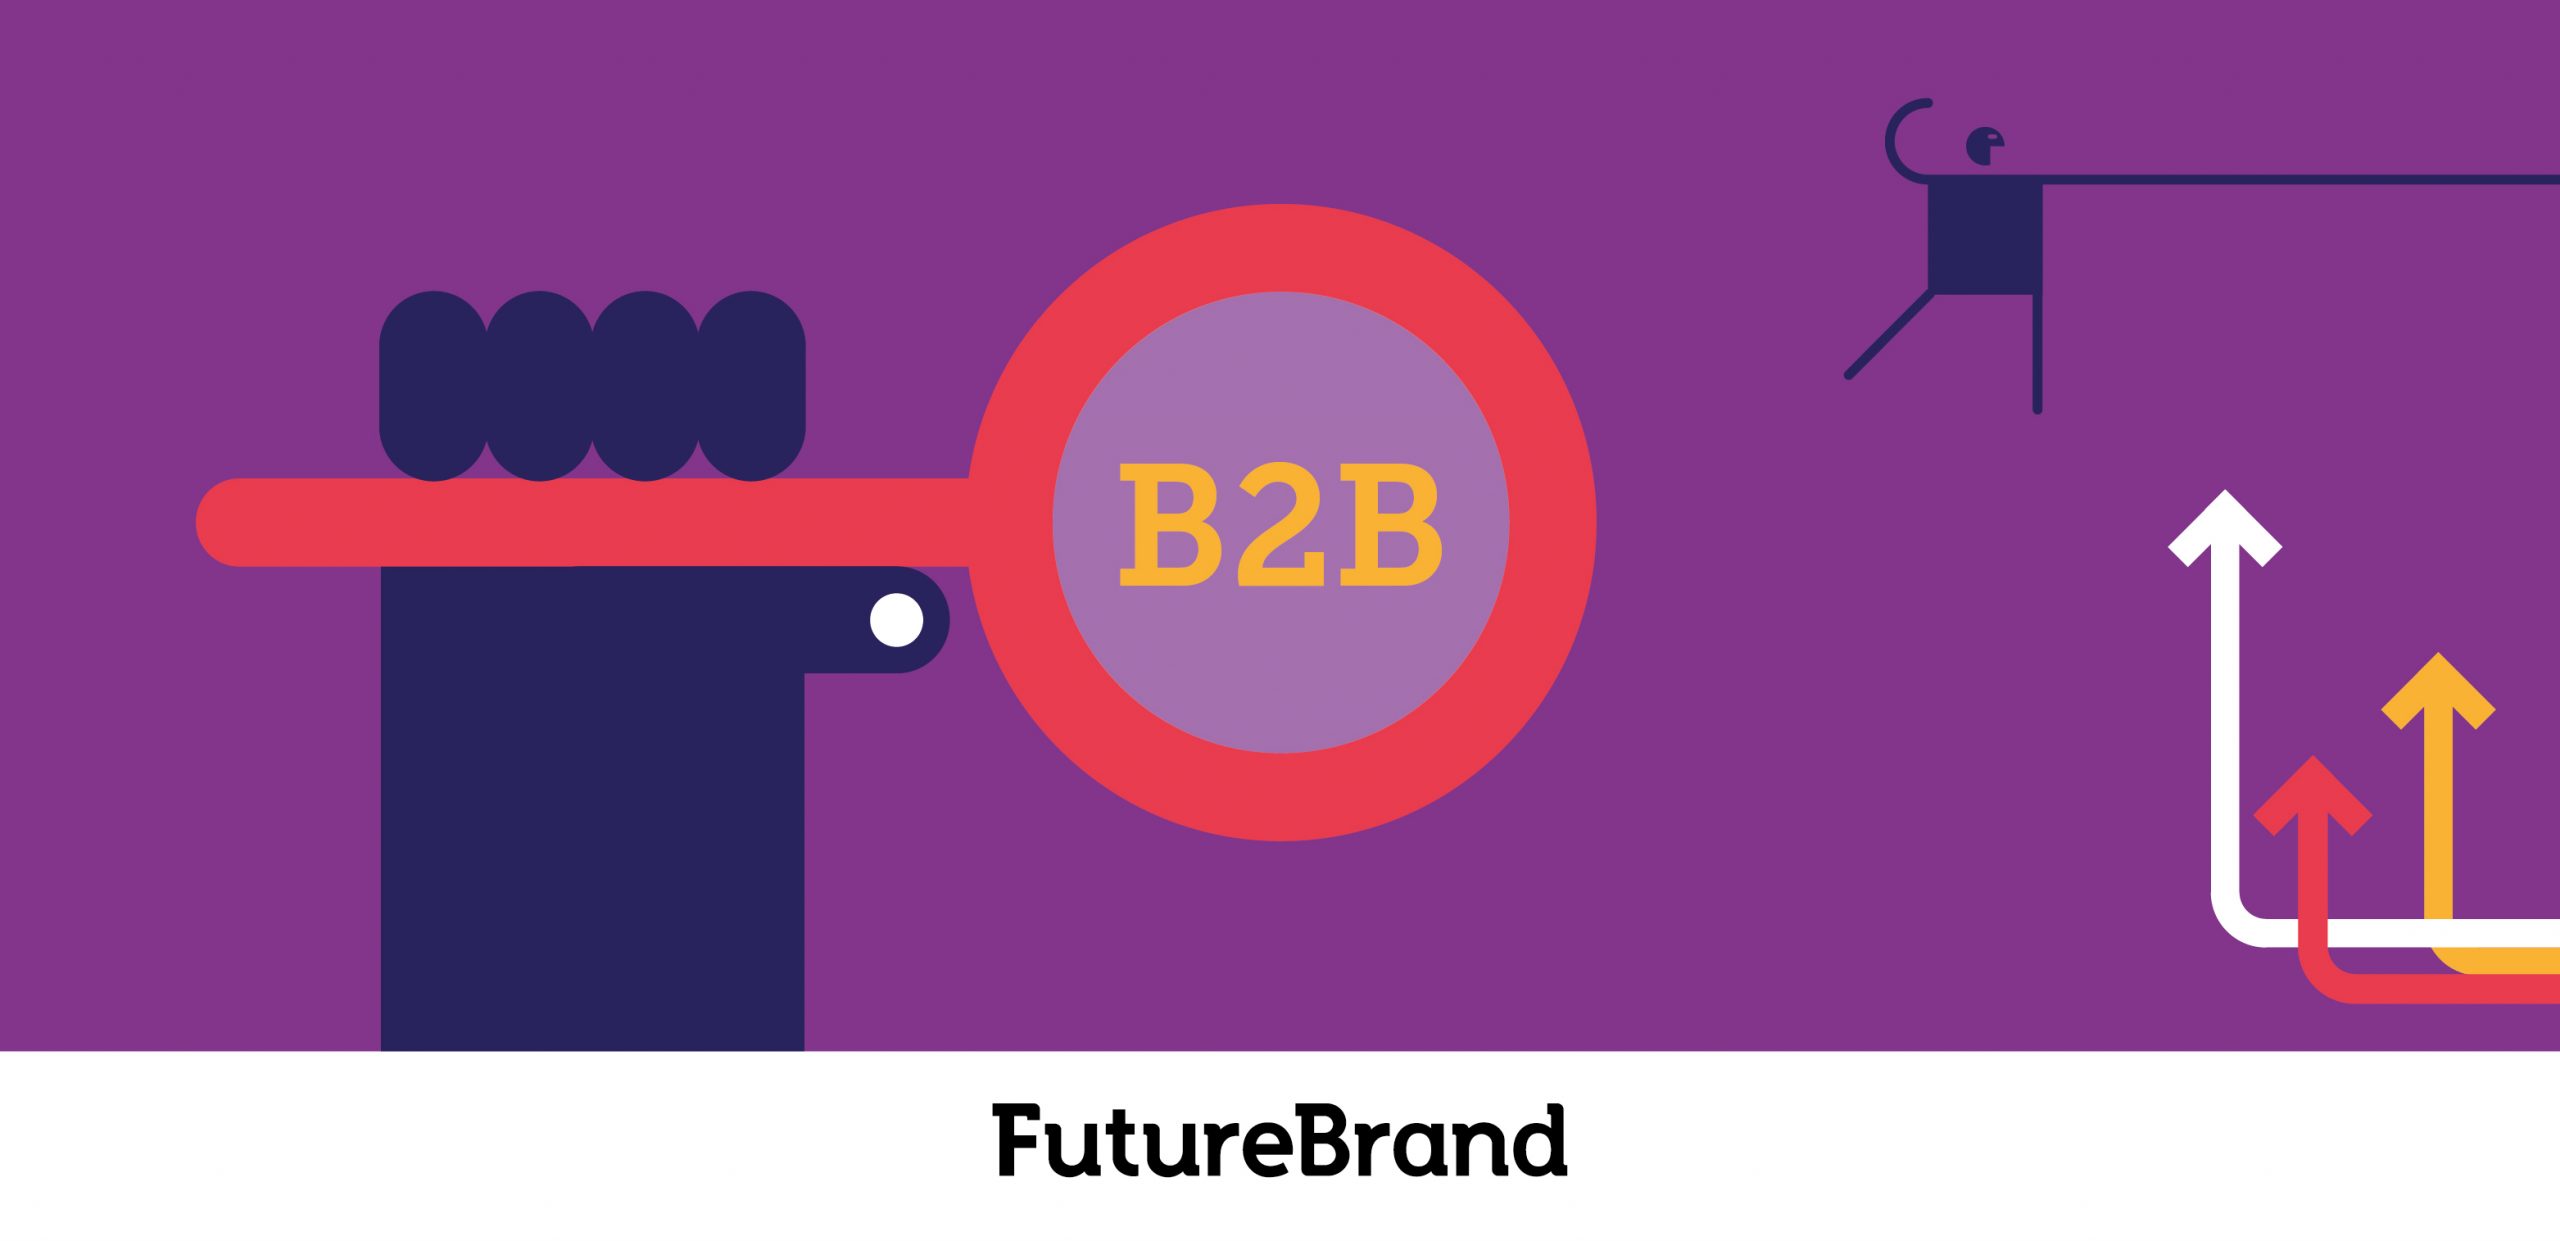 Is branding important for B2B companies?